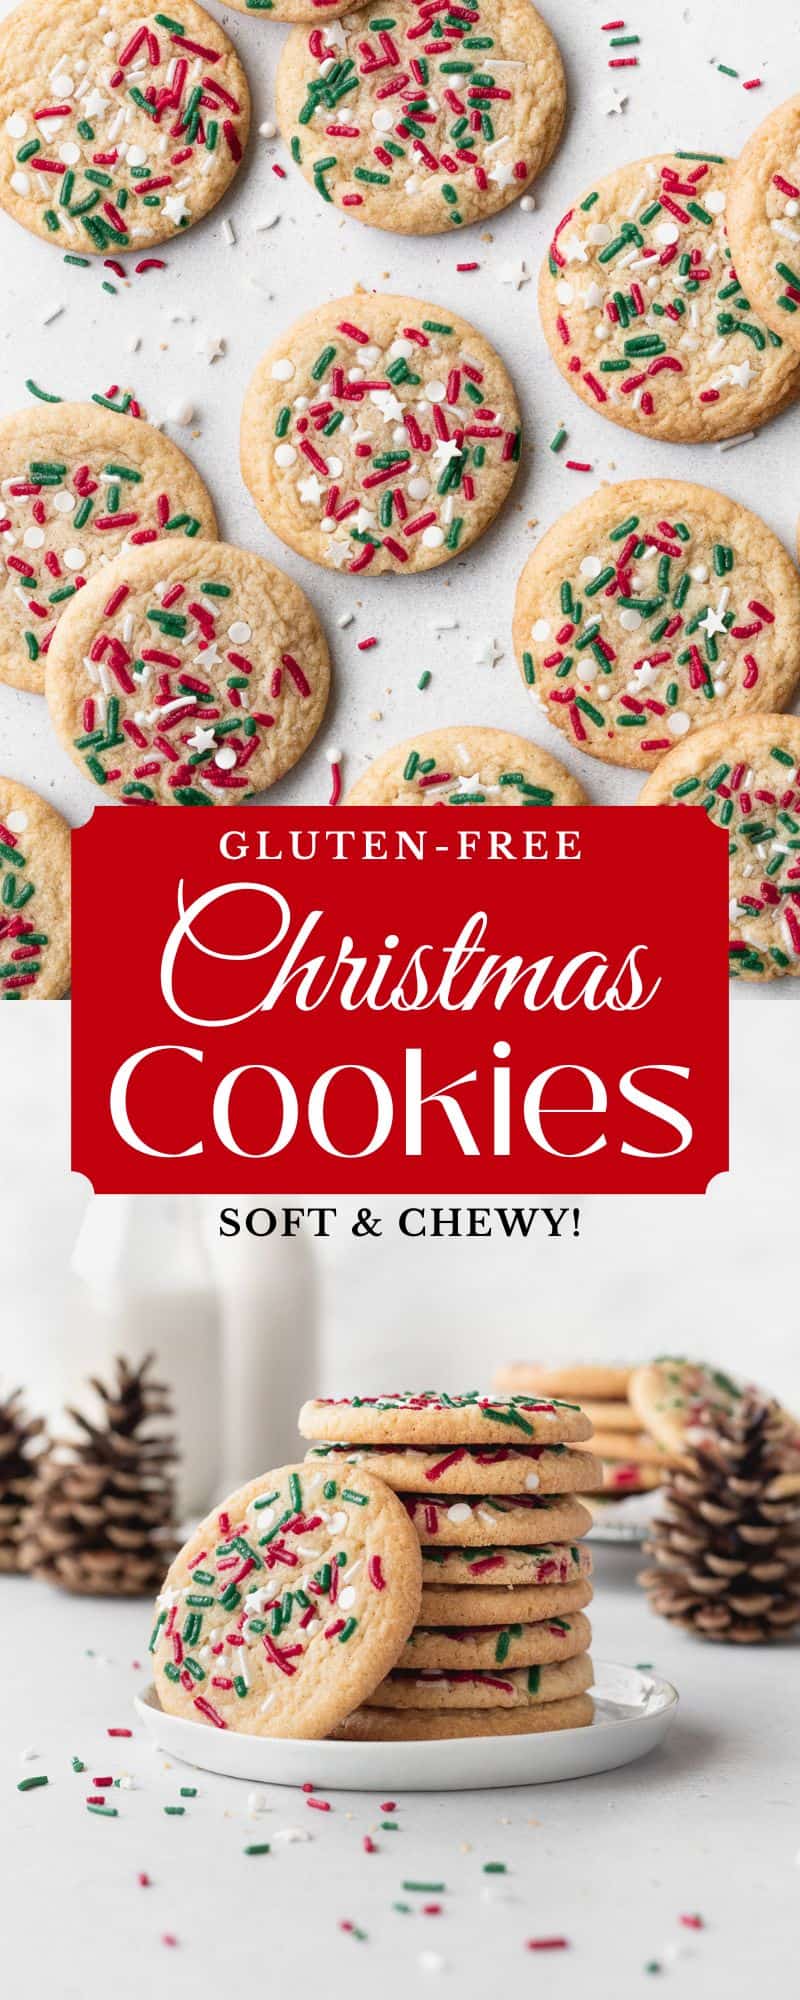 Gluten-free Christmas cookies with red and green sprinkles.